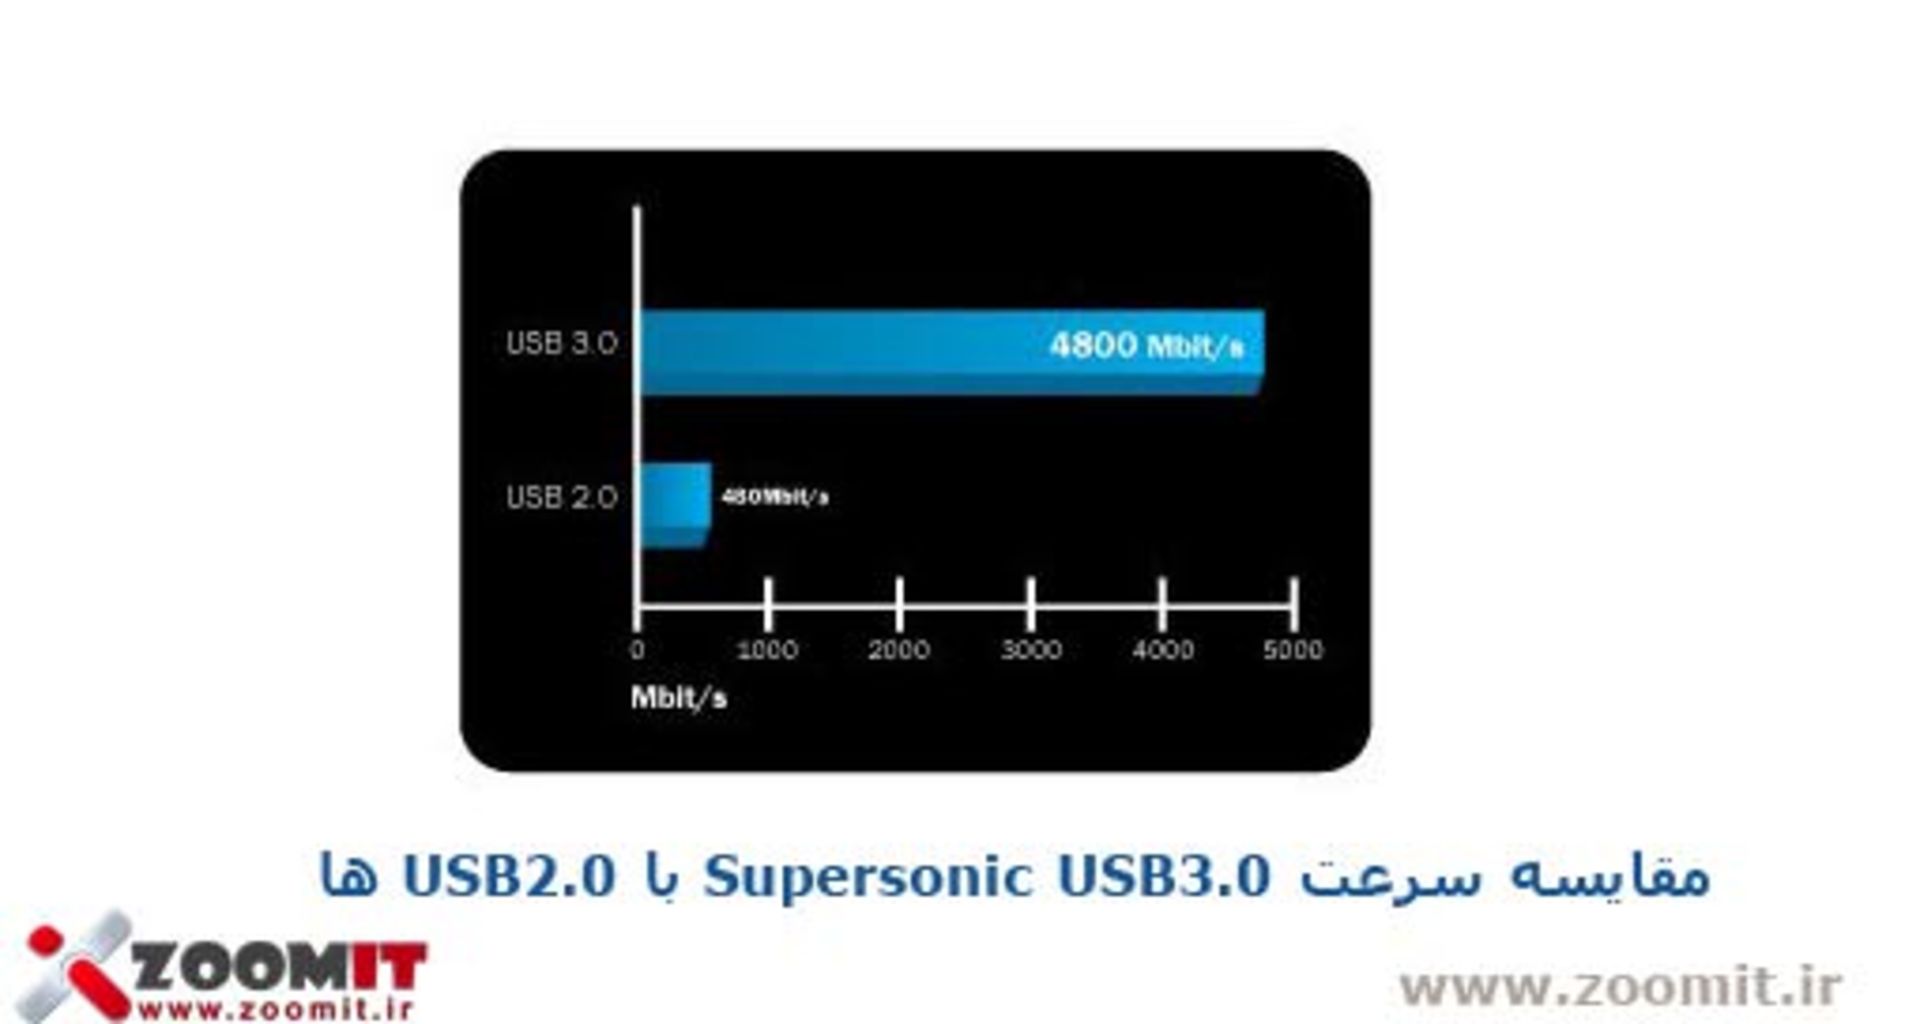 supersonic-usb-3.0-and-usb2.0-compair